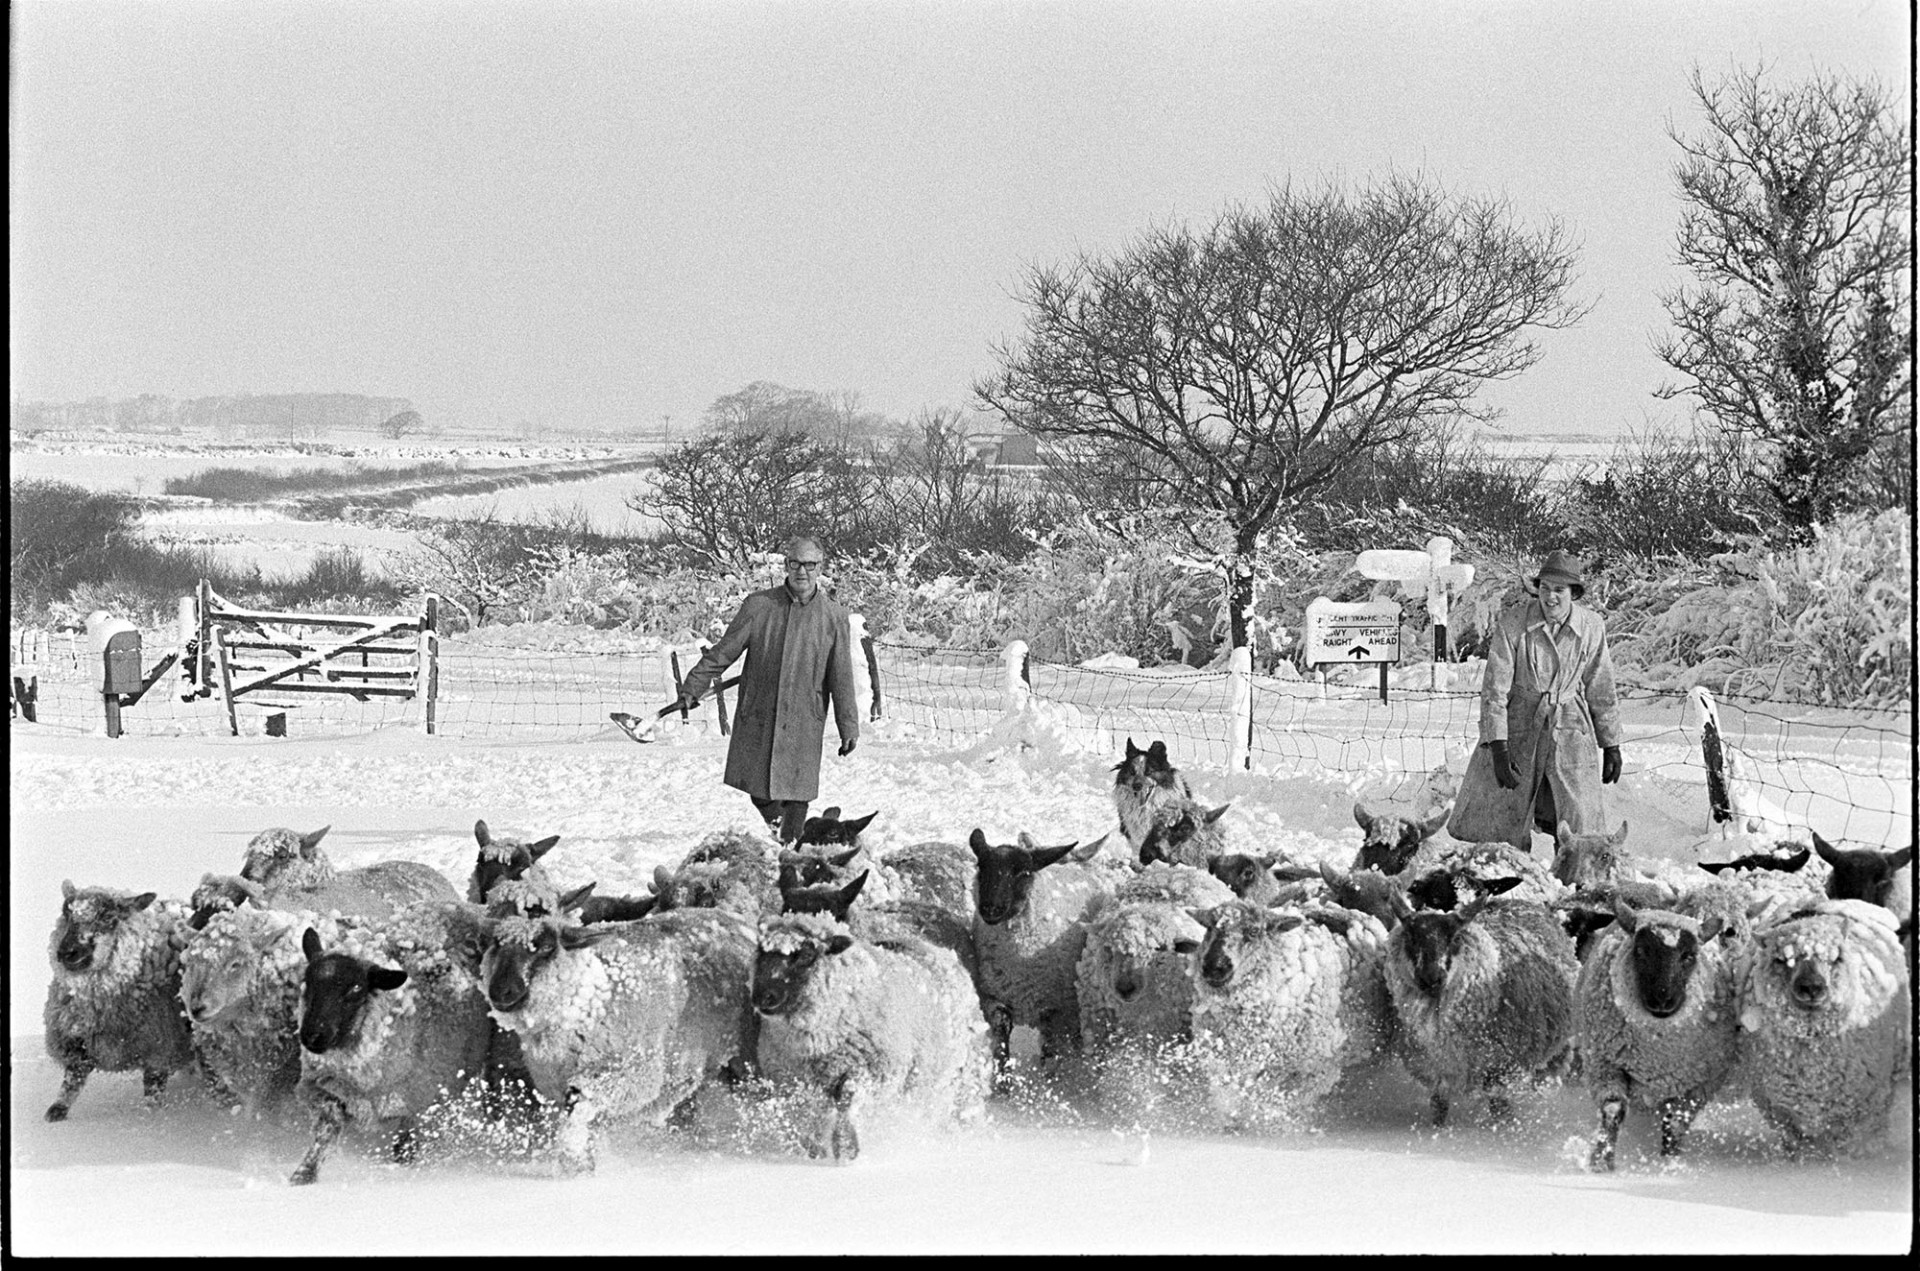 Snow, farmers herding sheep on common.
[Philip Heard, a woman and a dog herding sheep in the snow on Roborough Common. The sheep's hooves are throwing up flurries of snow. A snow covered sign post, fields and hedges are visible in the background.]